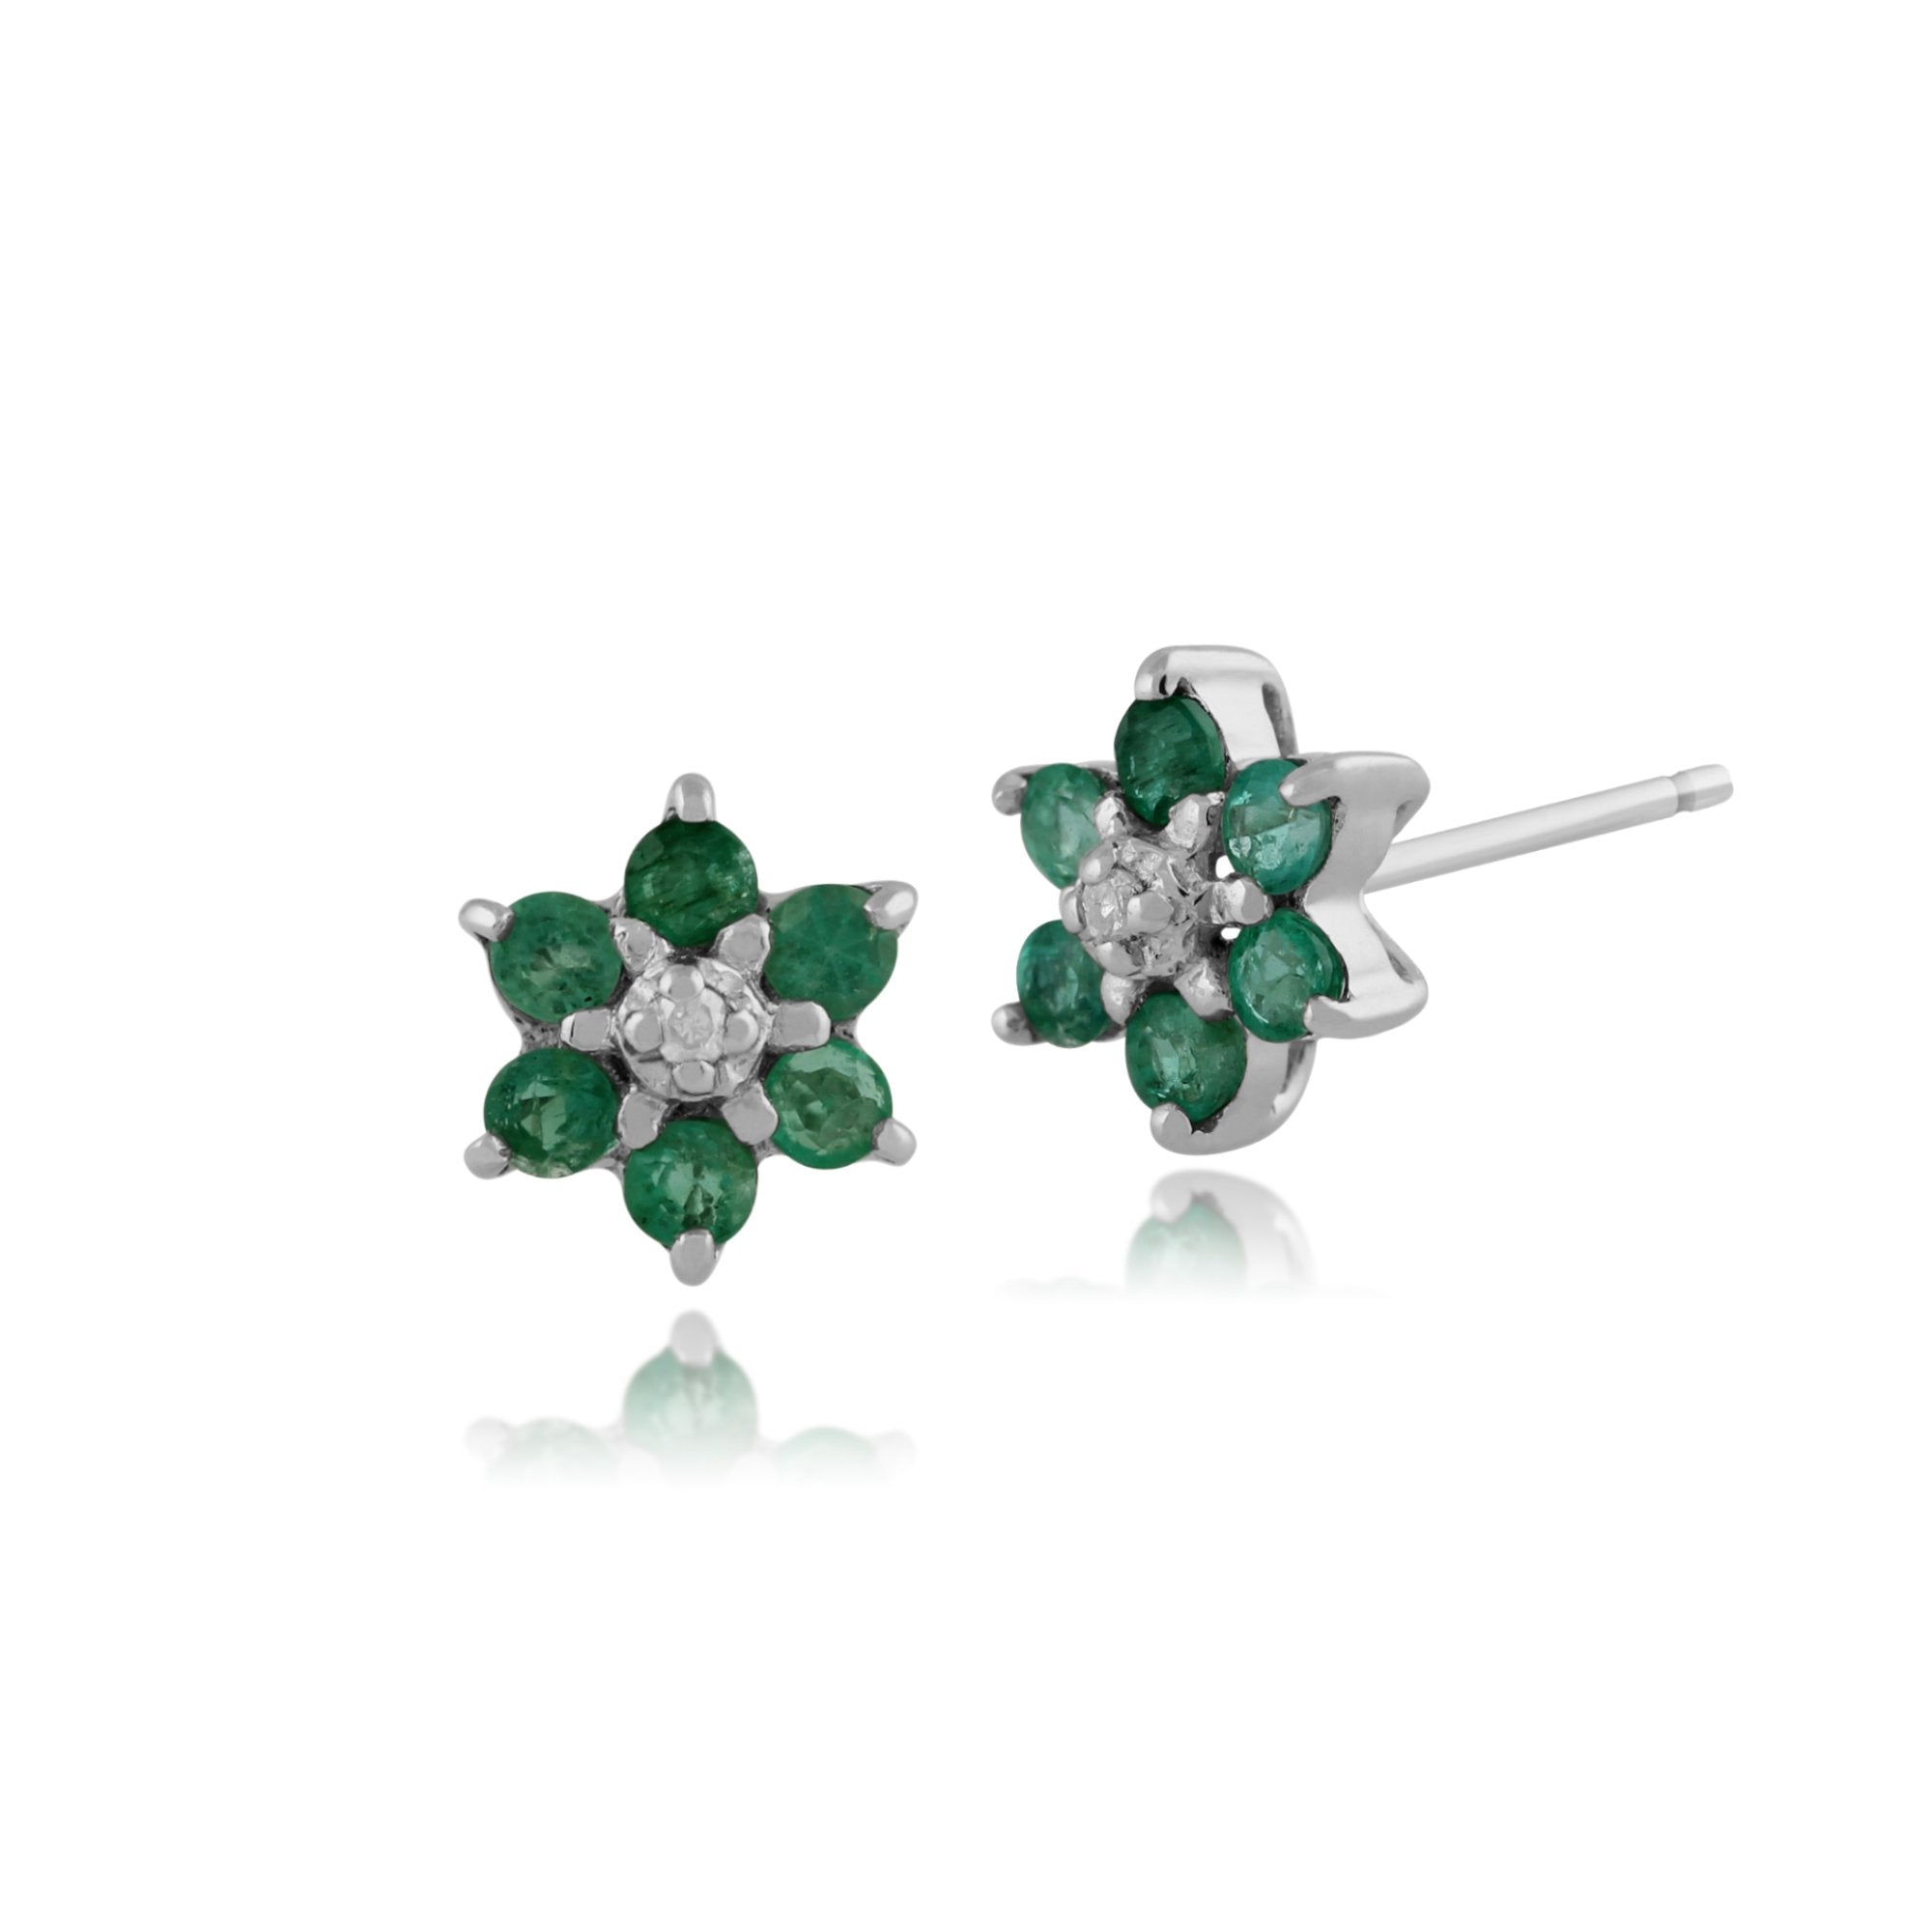 Classic Round Emerald & Diamond Cluster Stud Earrings in 9ct White Gold